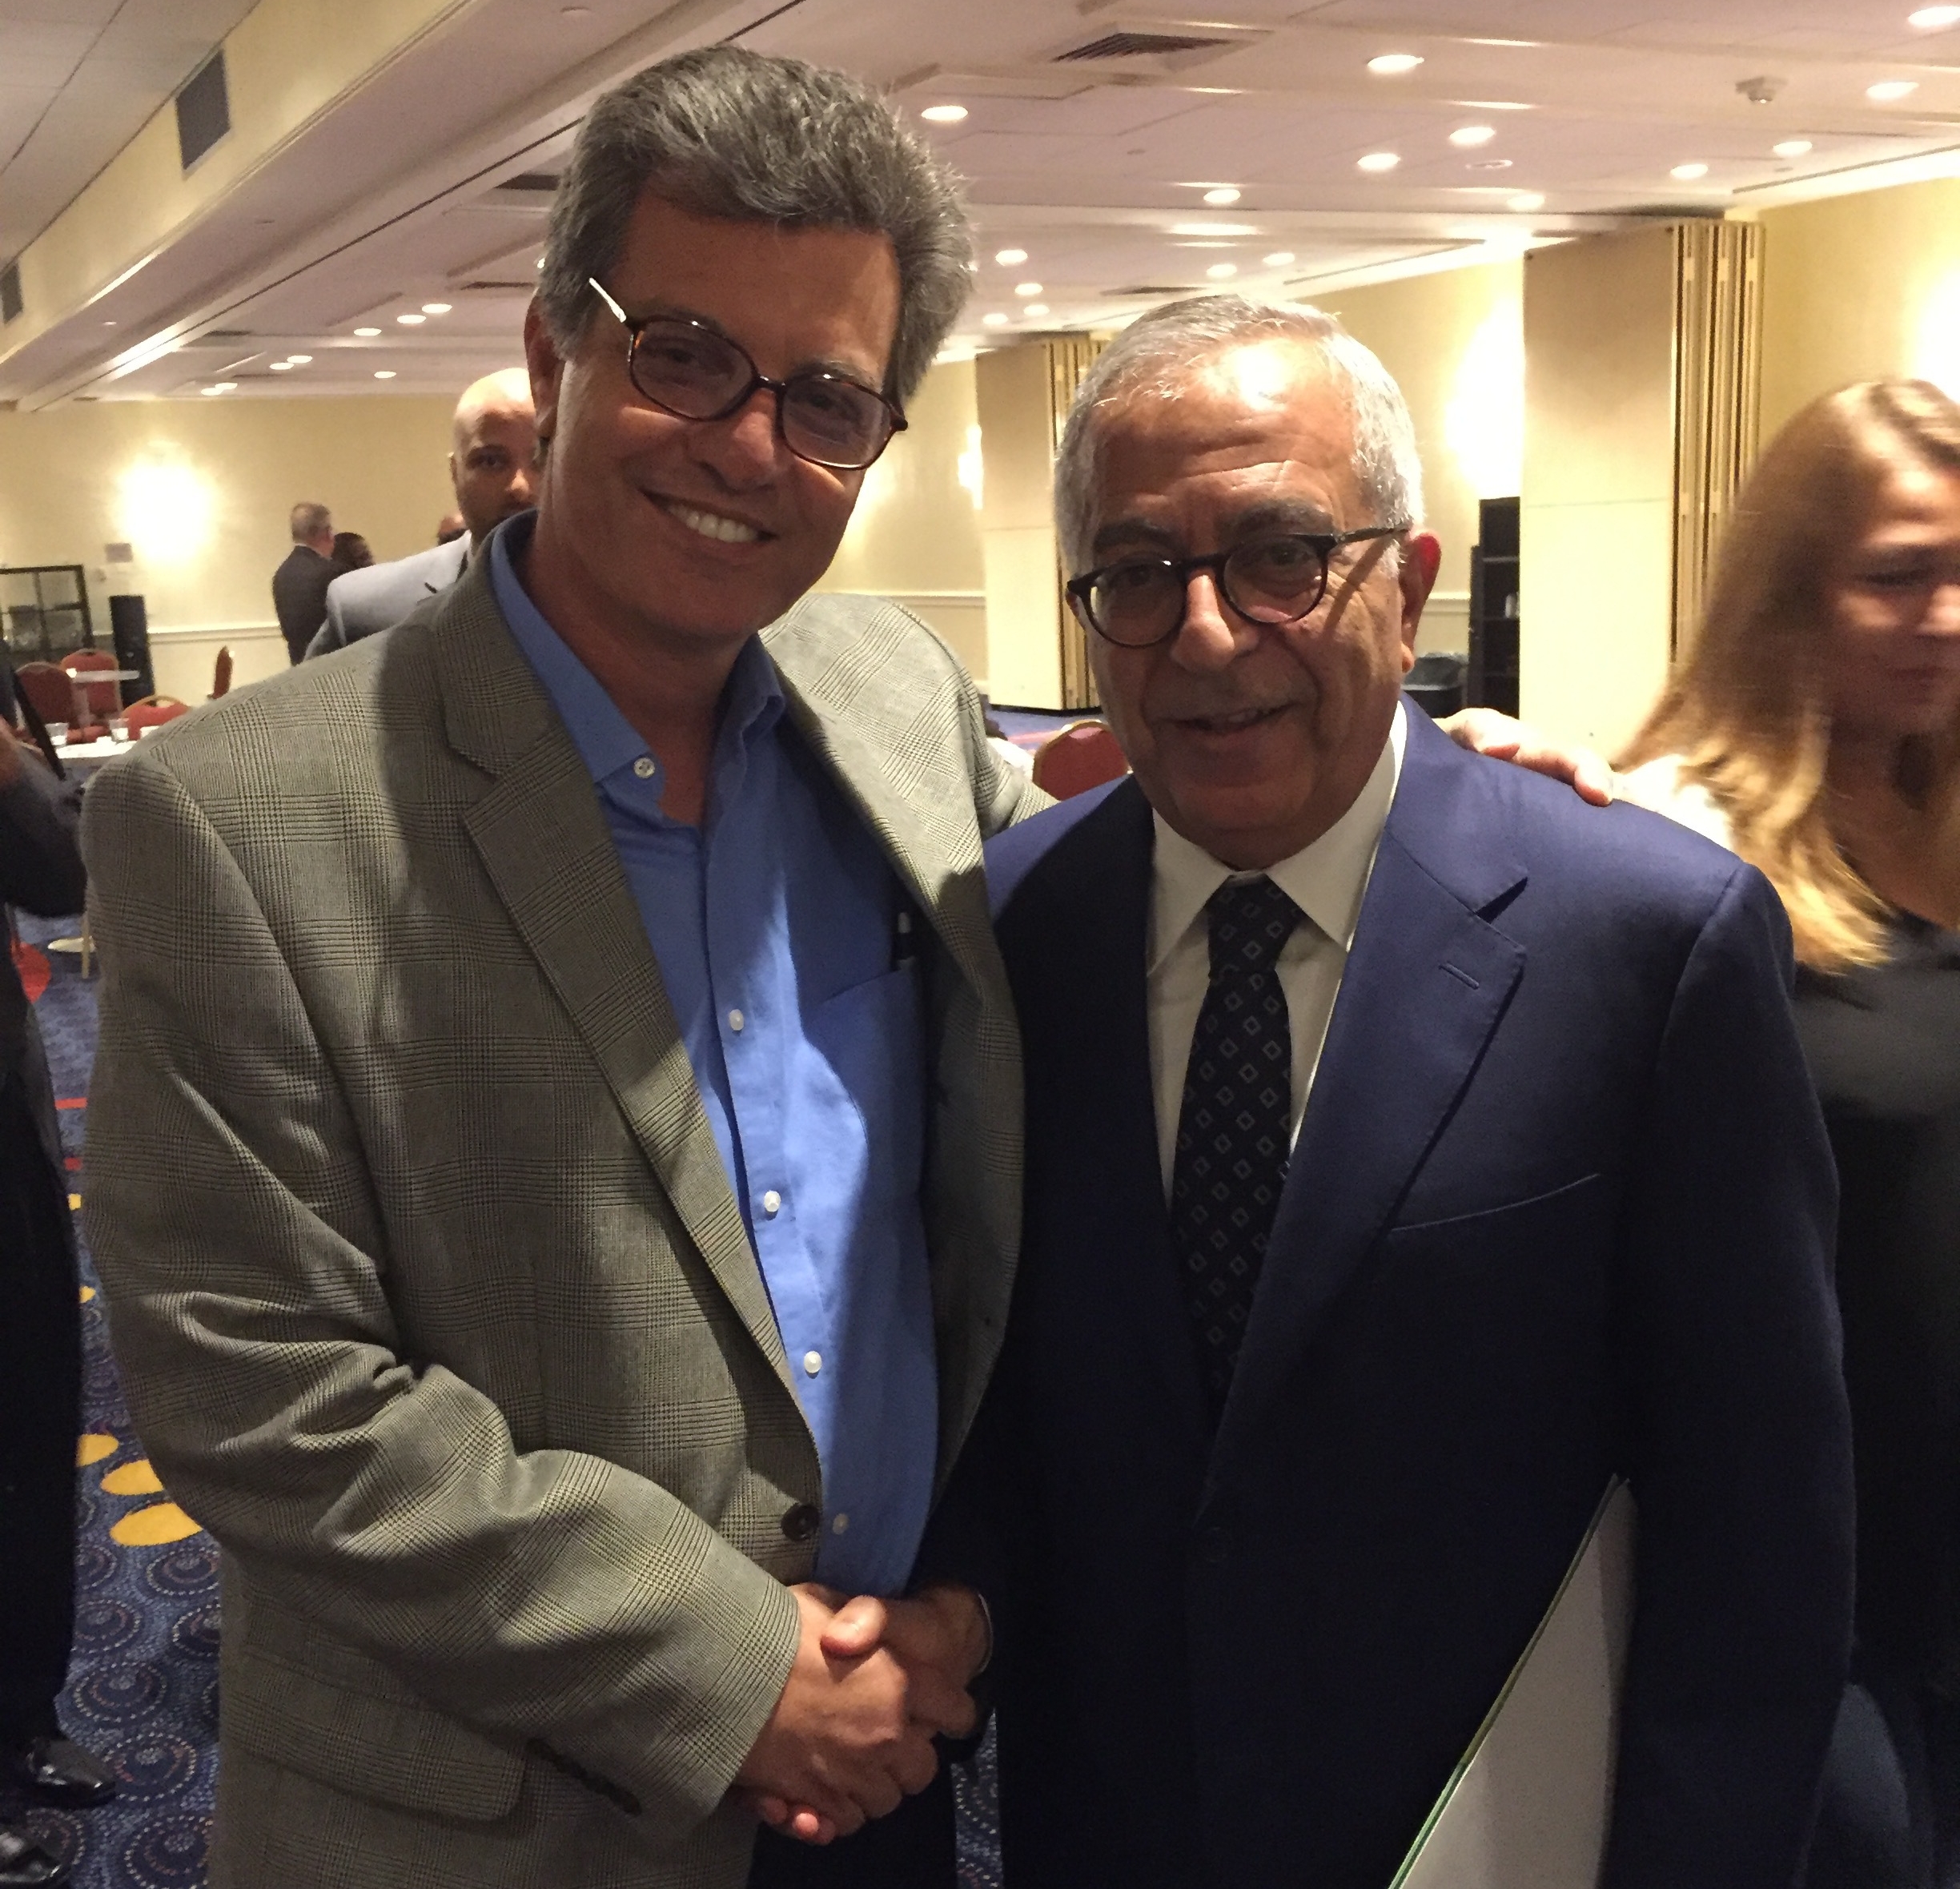  Ziyad with Salam Fayyad, forrmer Finance Minister and Prime Minister of the Palestinian Authority - at AMP 2016 